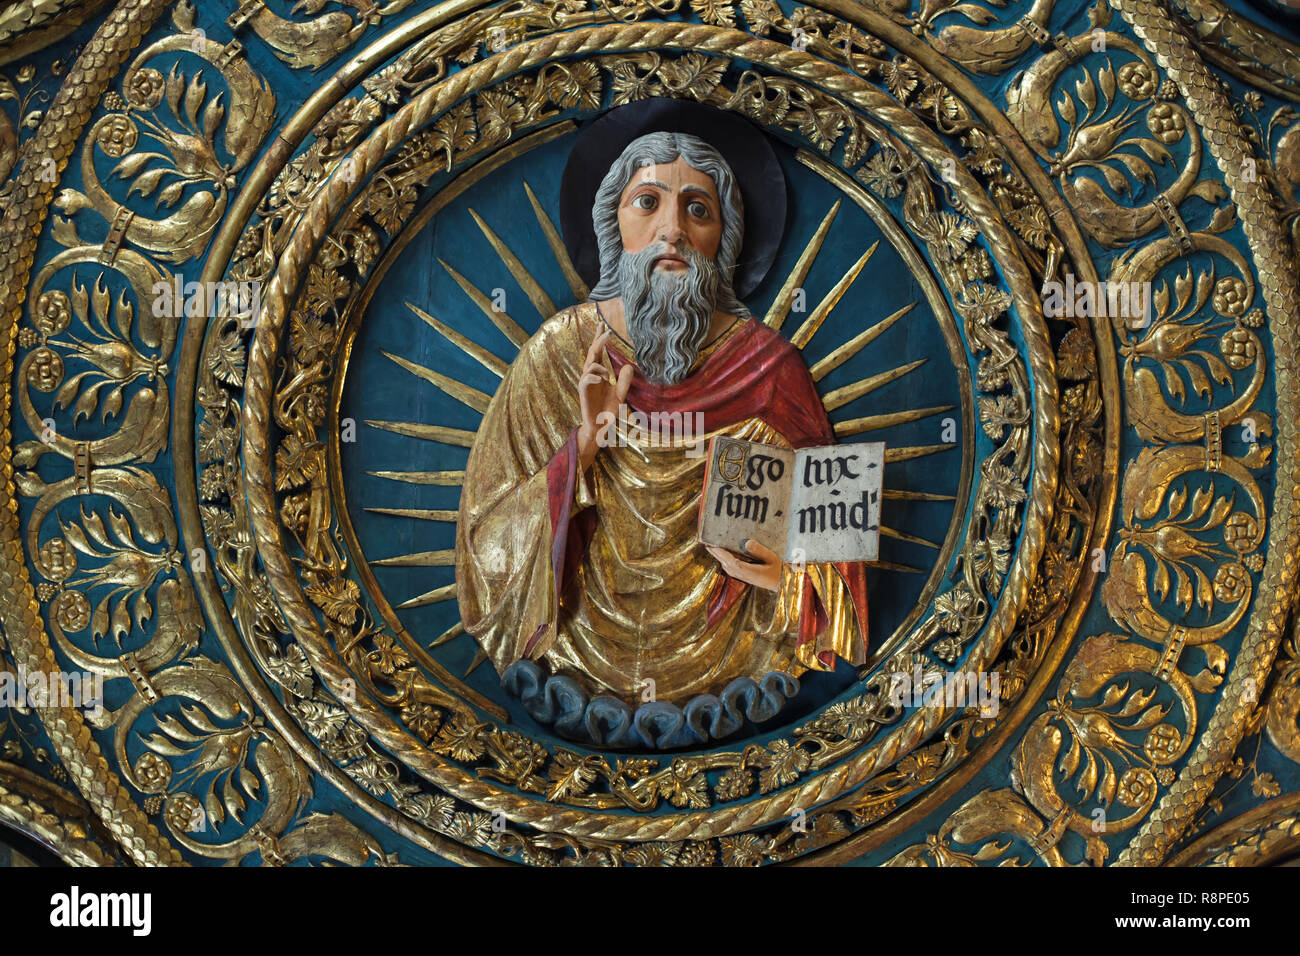 Christ Pantocrator carved by a unknown Venetian master, probably from the Bottega dei Bianco, dated from the 1490s in the ceiling  in the Sala dell'Albergo of the former Scuola Grande della Carità, now housed the Gallerie dell'Accademia in Venice, Italy. Stock Photo